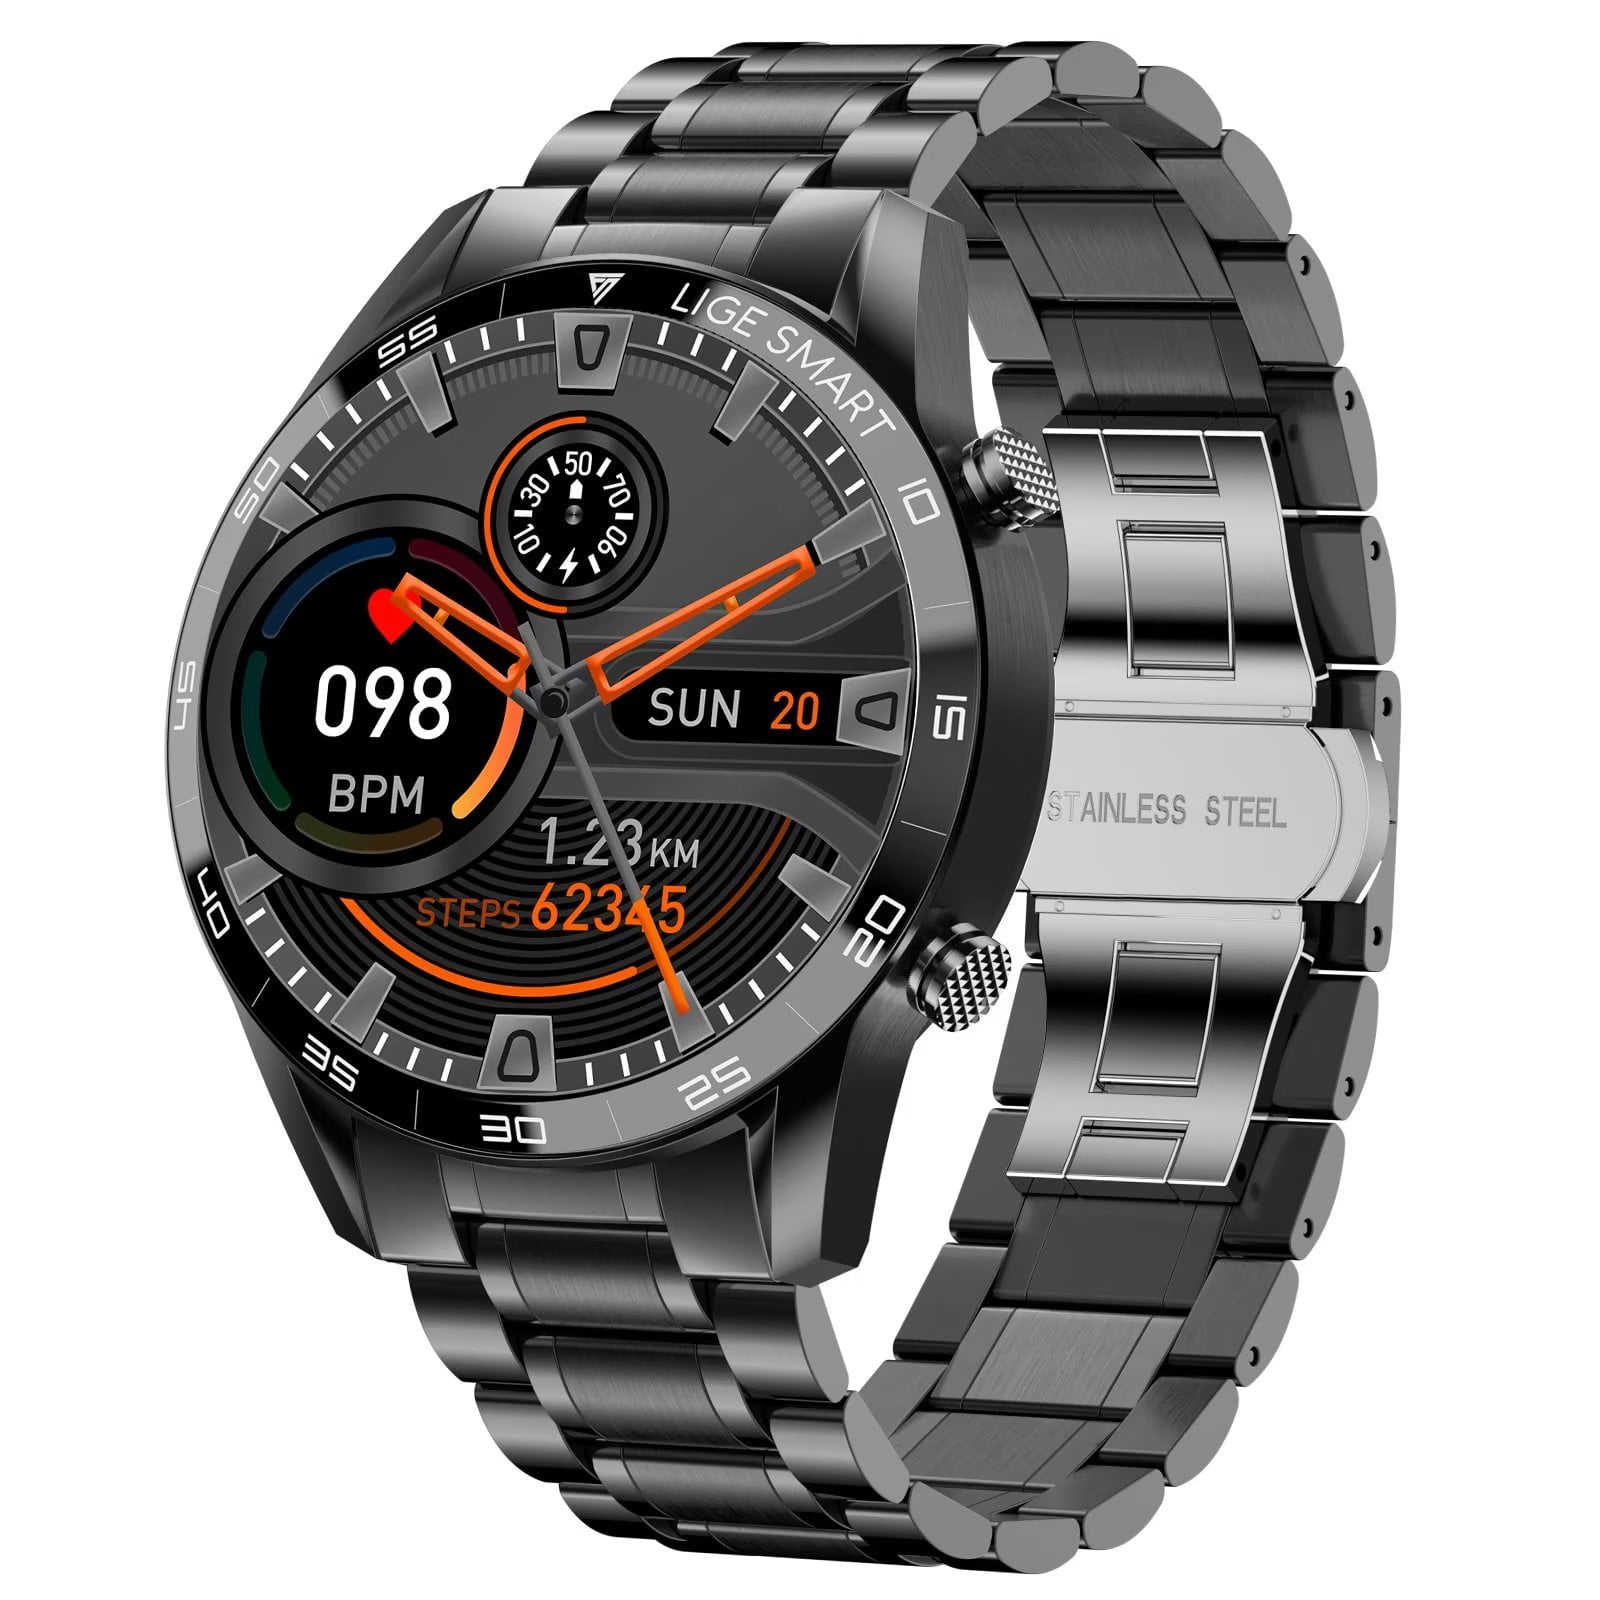  Ticwatch Pro 5 Smartwatch for Men Snapdragon W5+ Gen 1 Wear OS  Smart Watch 80 Hrs Long Battery Life Health Fitness Tracking 5ATM Water  Resistance GPS Compass Android Only Compatible, Obsidian : Electronics